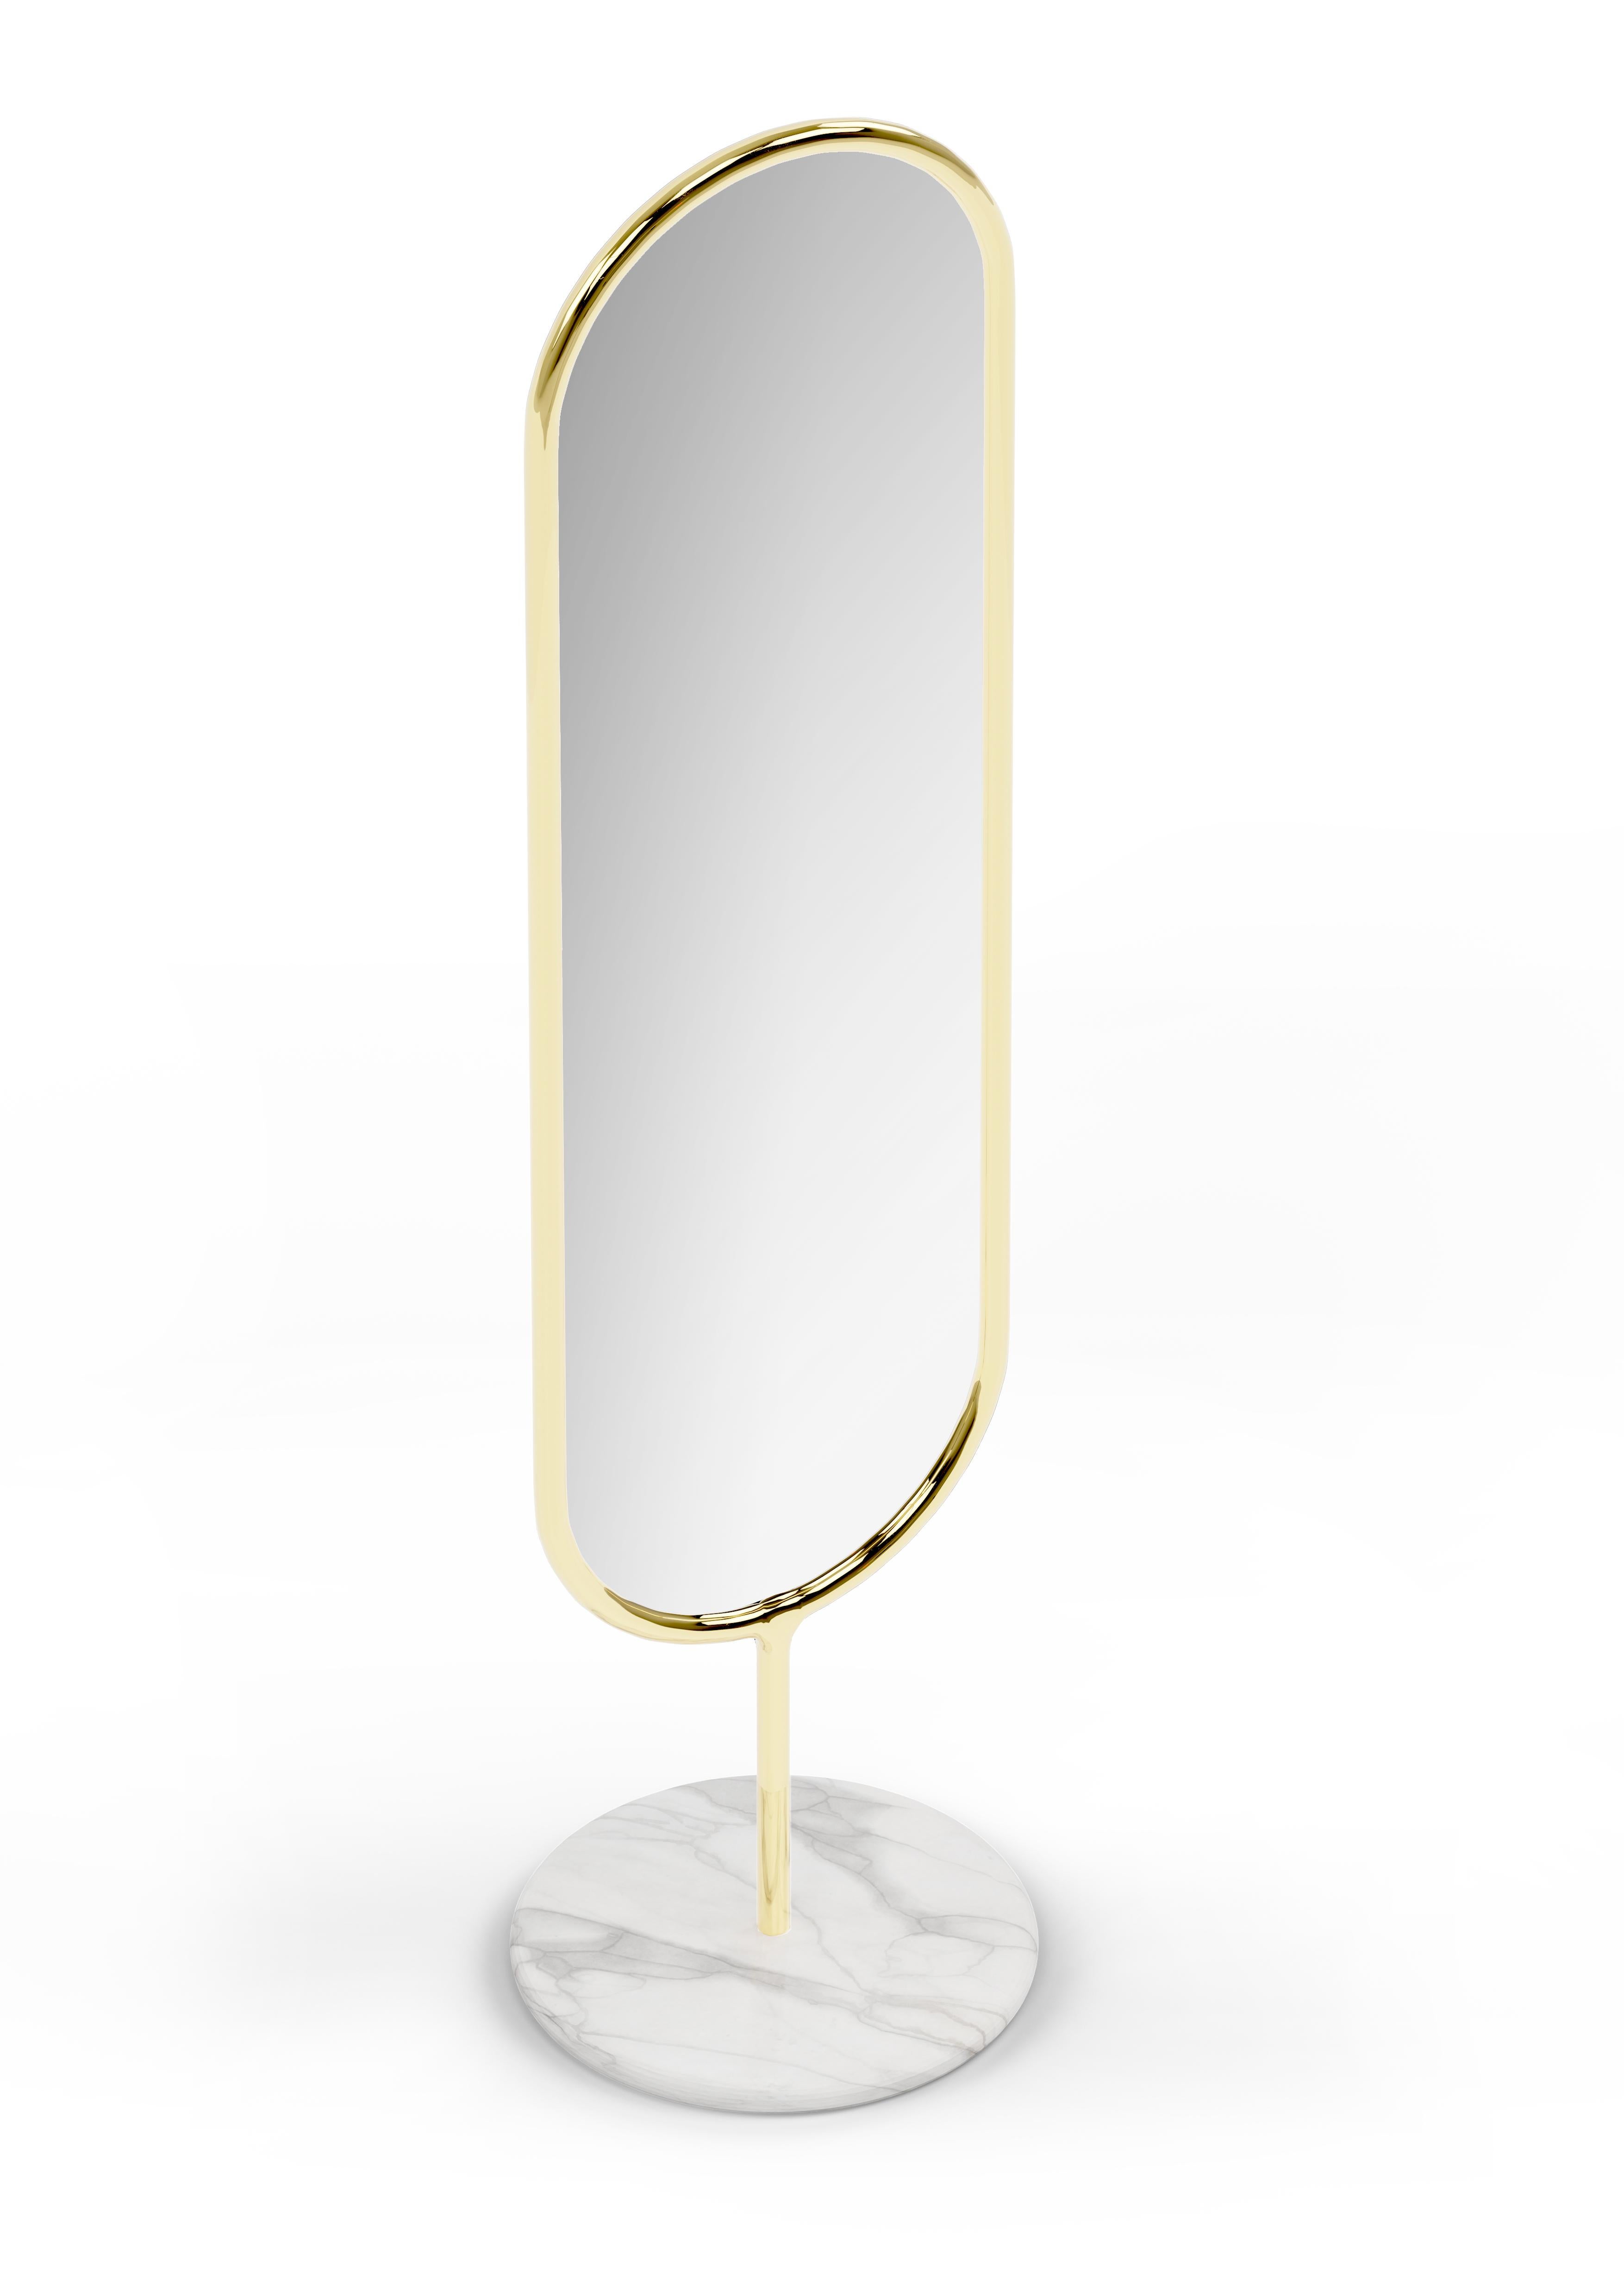 Portuguese Polished Brass and Marble Marshmallow Floor Mirror, Royal Stranger